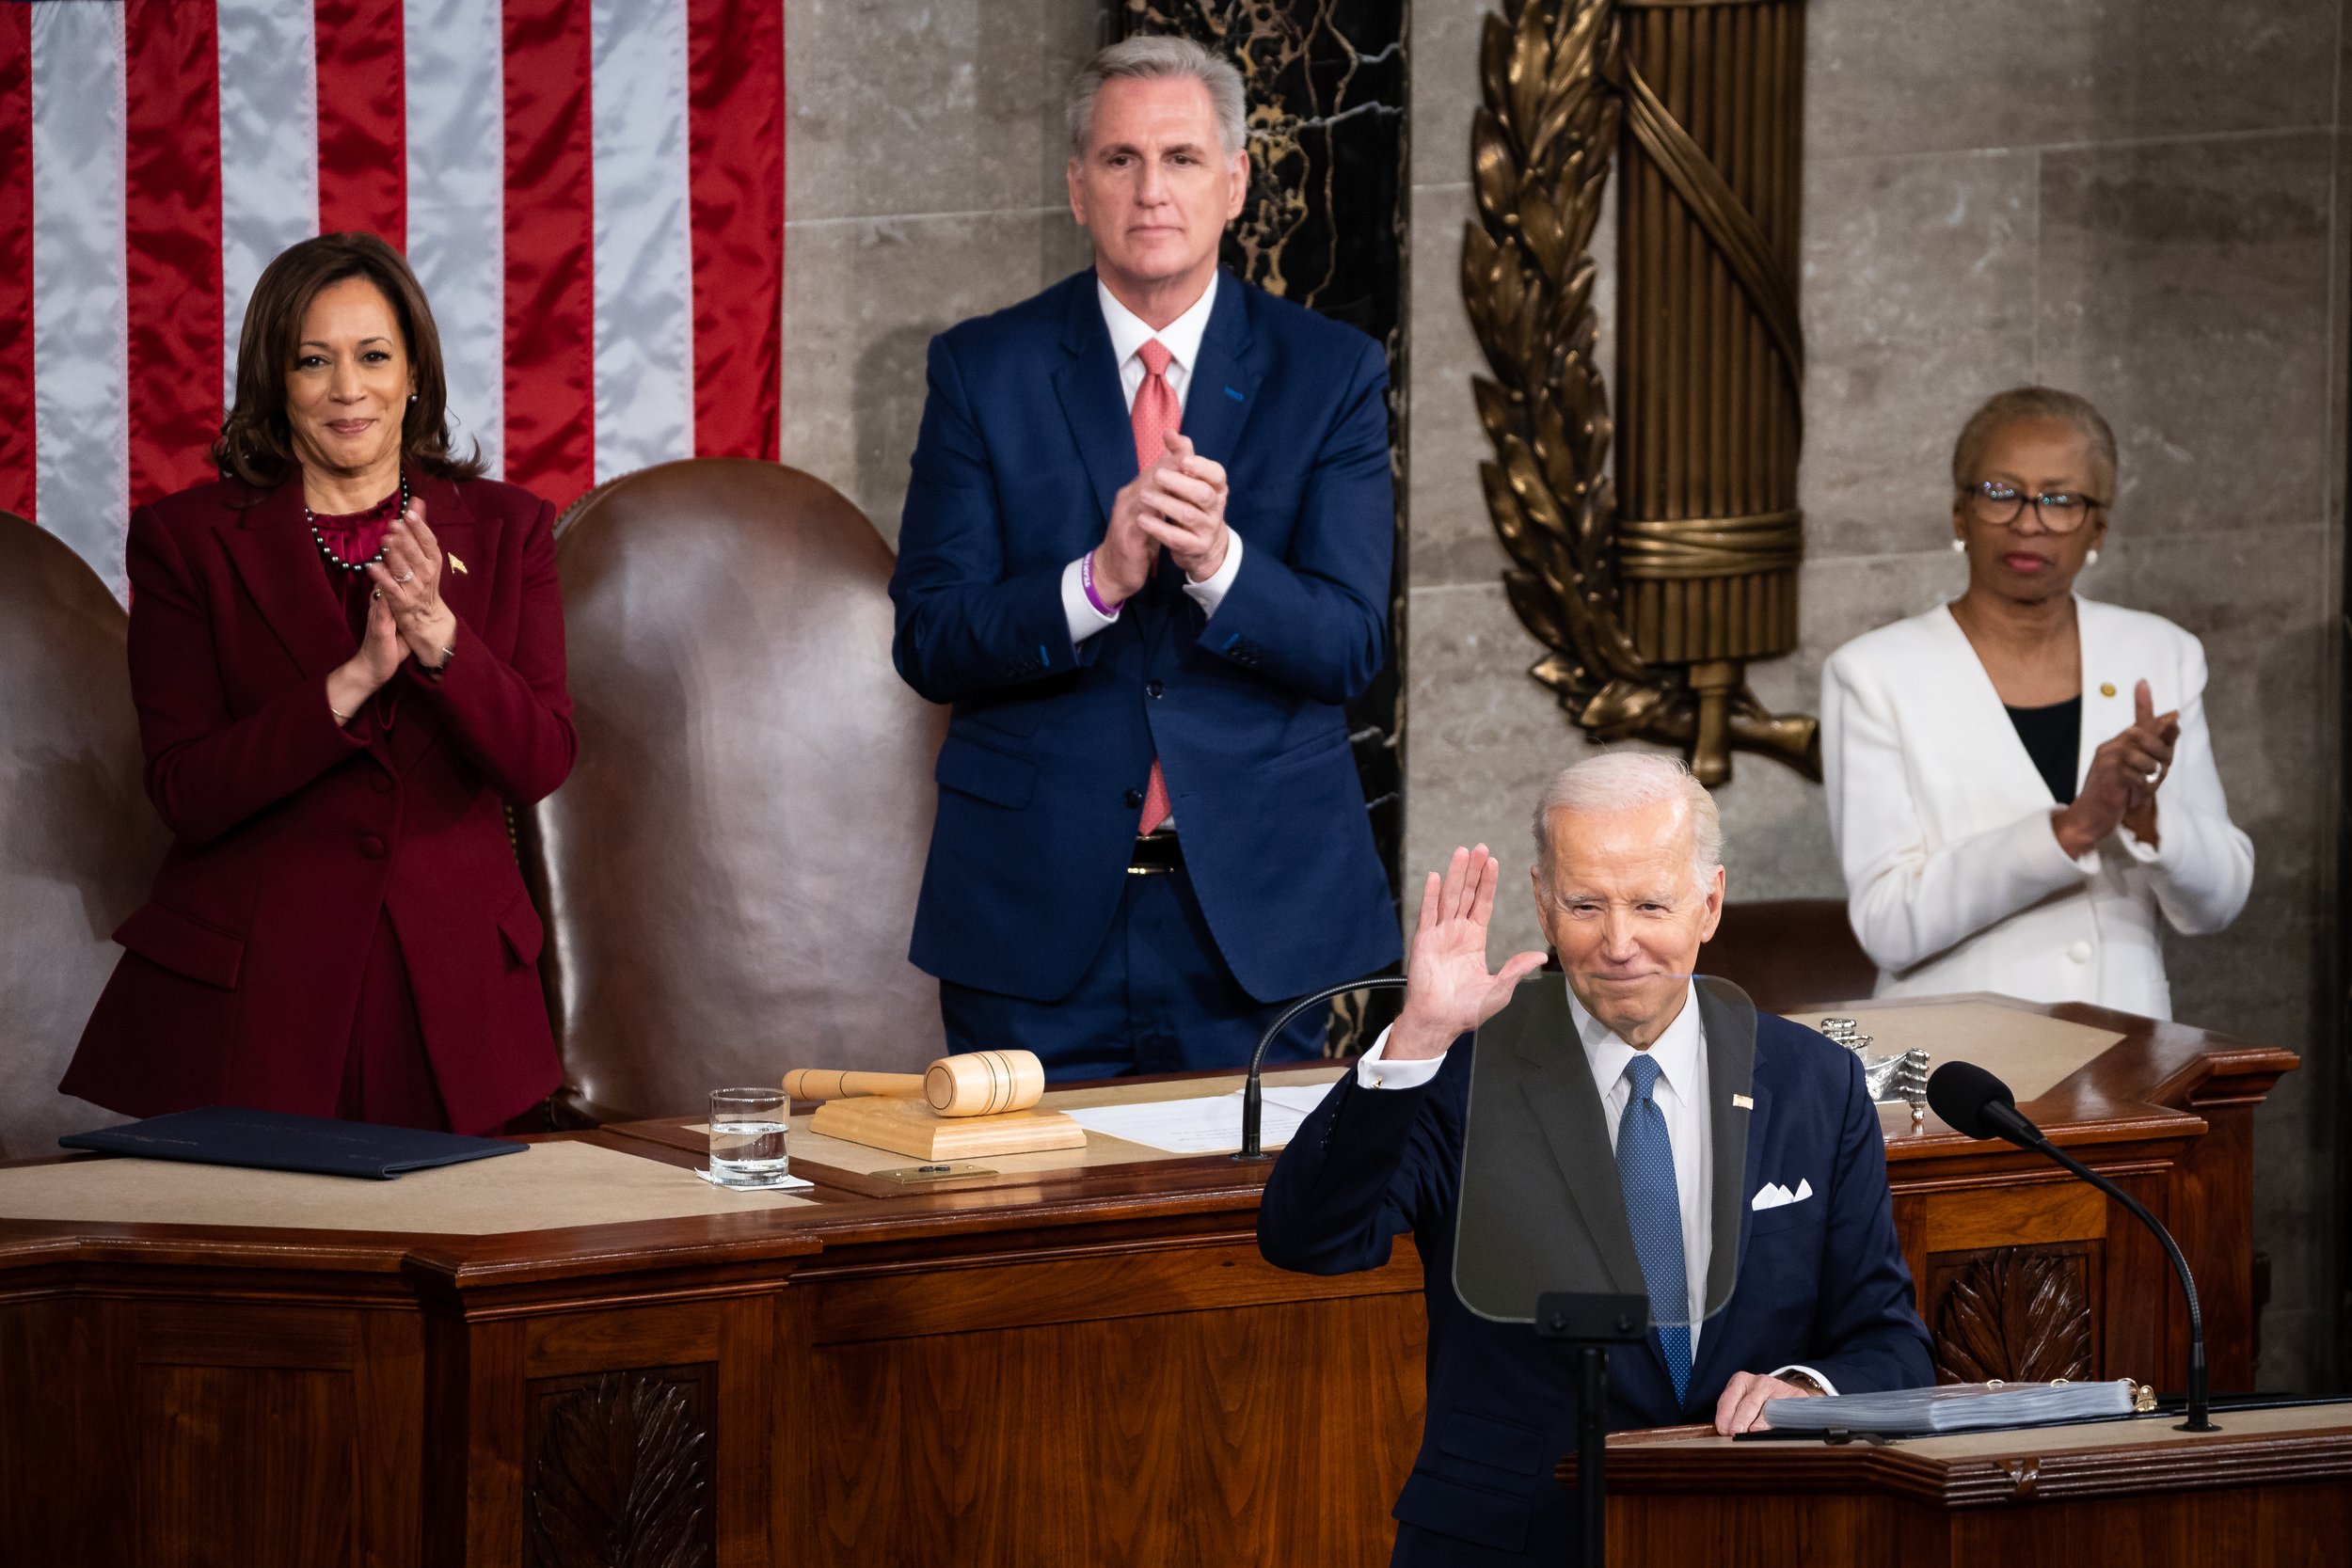  President Joe Biden delivers the State of the Union address in the the House chamber at the U.S. Capitol Feb. 7, 2023. Also seen are Vice President Kamala Harris, House Speaker Kevin McCarthy (R-Calif.), and Clerk of the House Cheryl Johnson. 